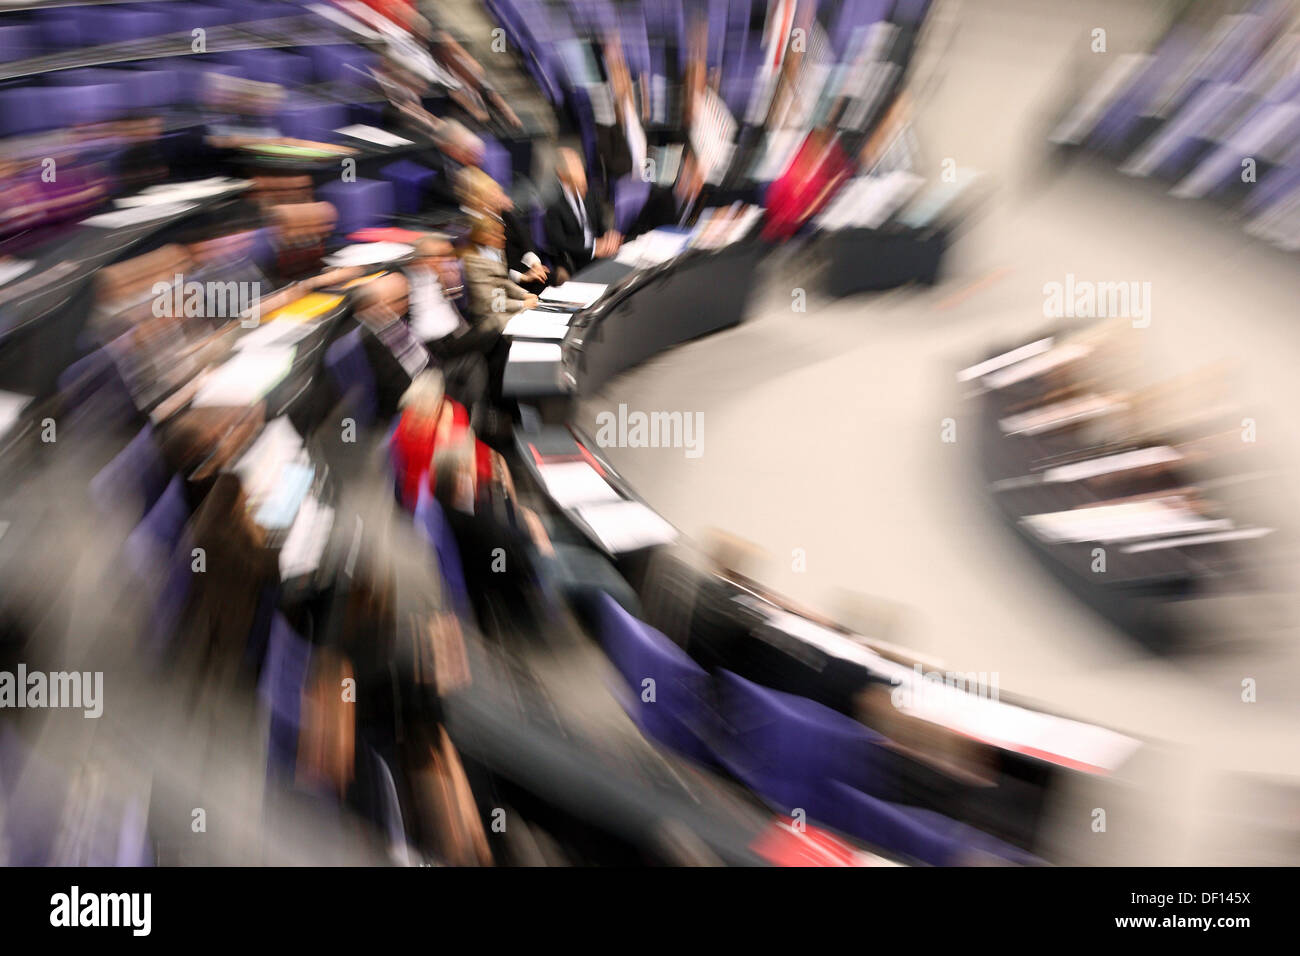 Berlin, Germany, in the plenary session of the German Bundestag Stock Photo